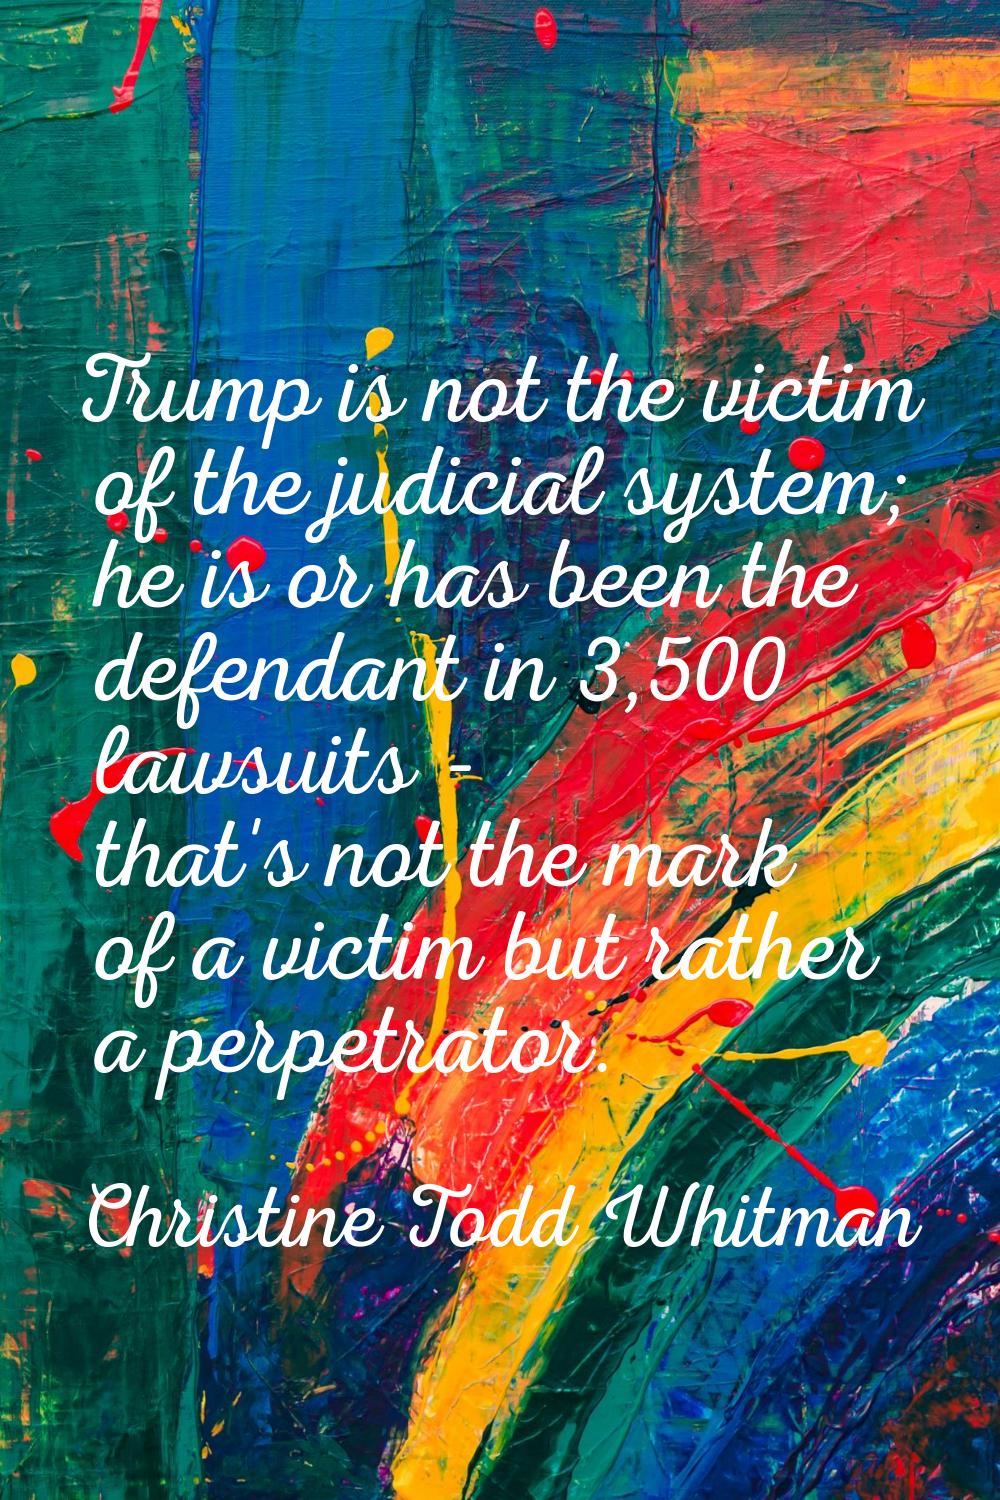 Trump is not the victim of the judicial system; he is or has been the defendant in 3,500 lawsuits -